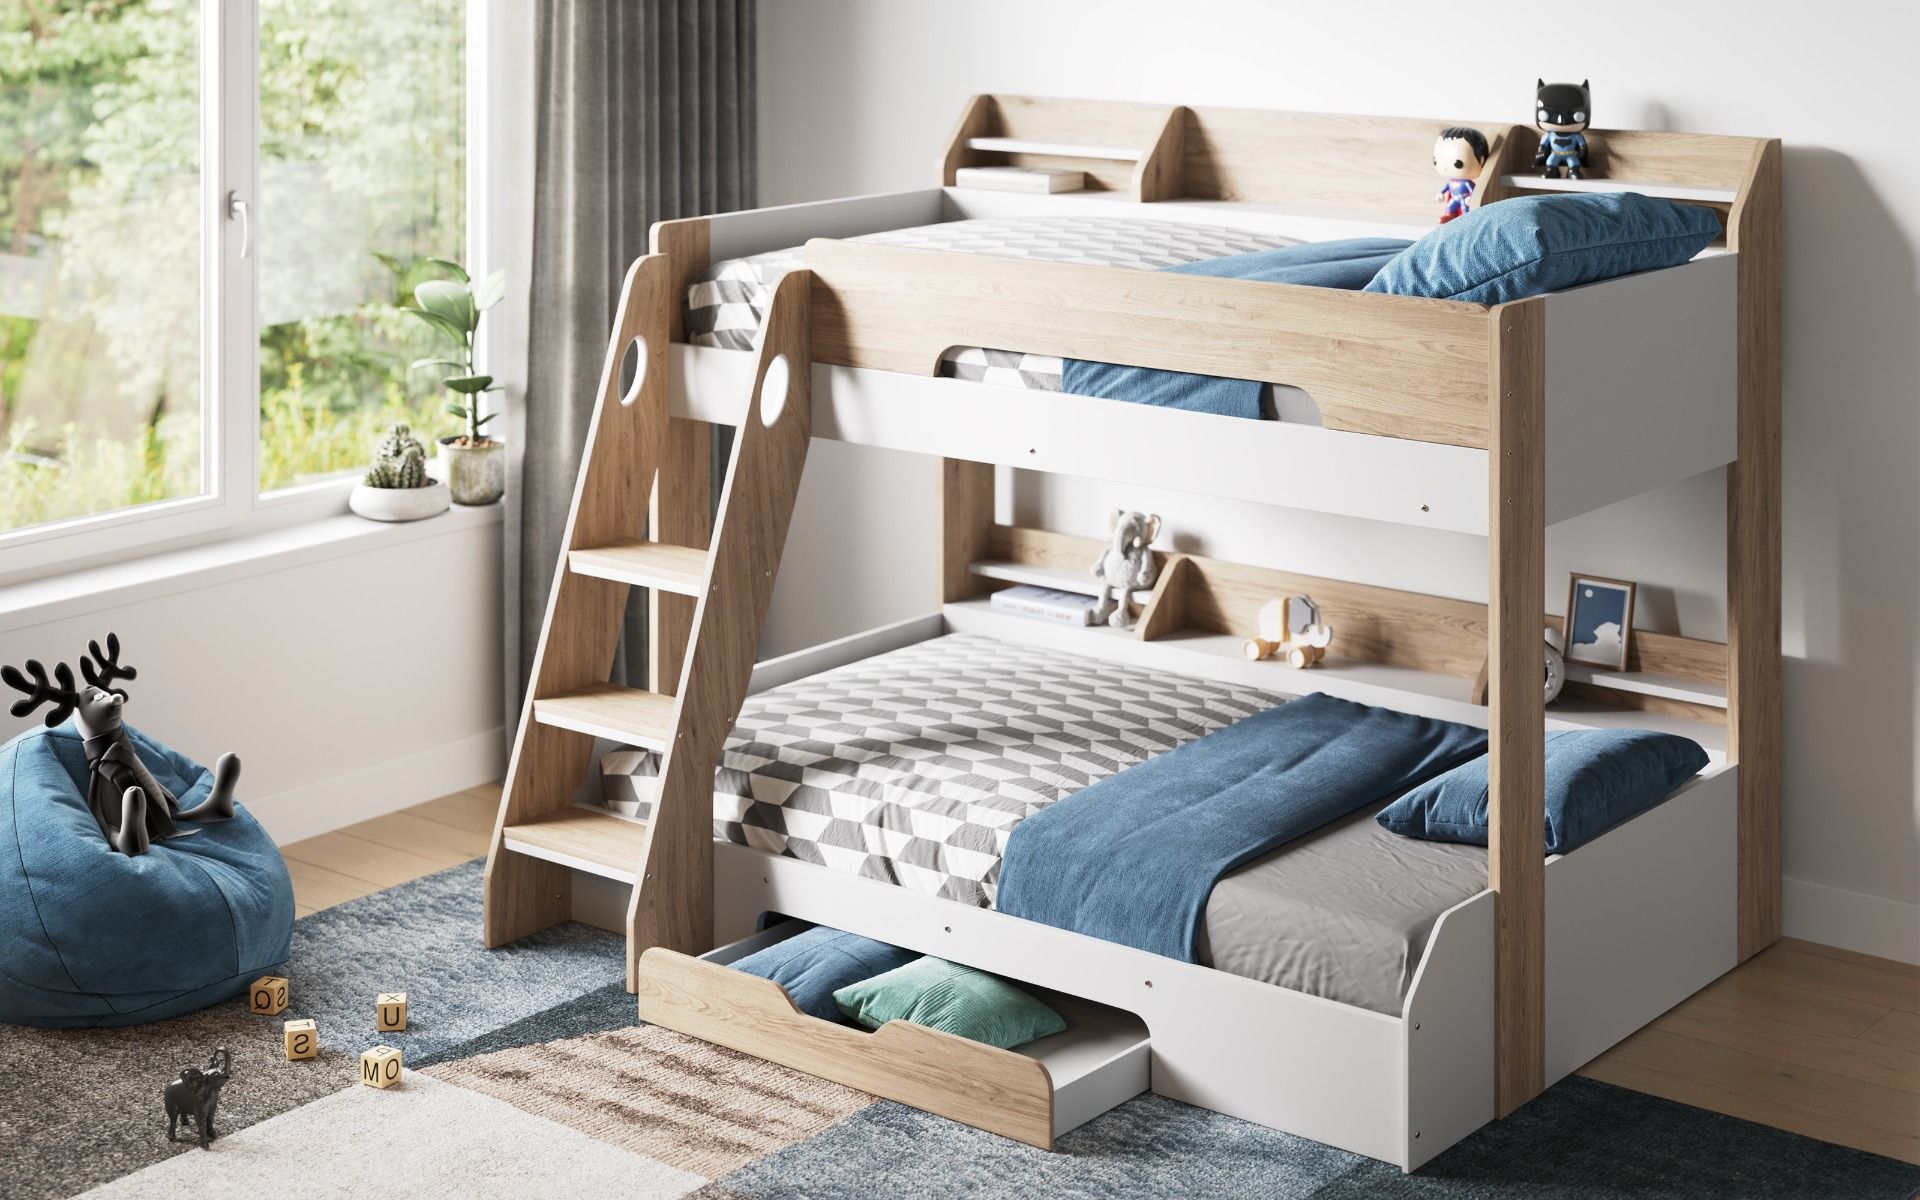 Flair Flick Triple Bunk Bed with Shelves And Drawer - Oak